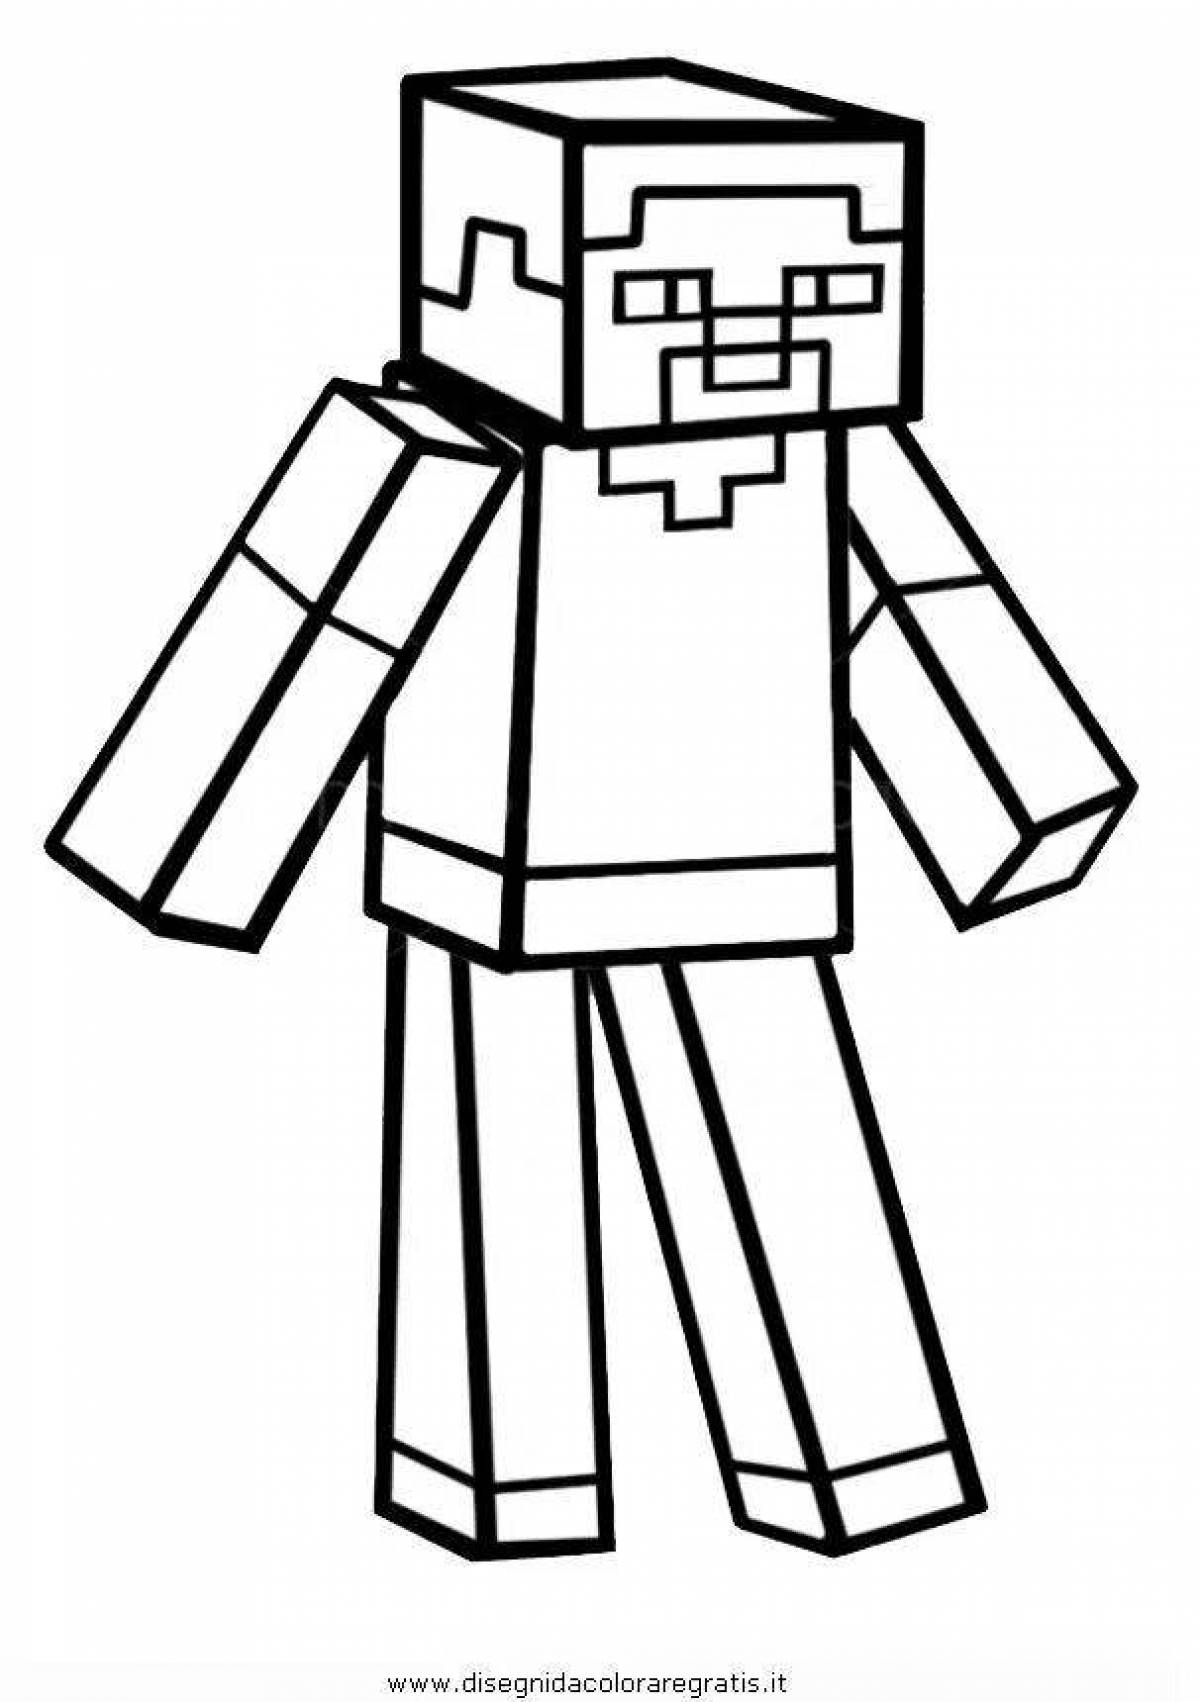 Awesome coloring herobrine minecraft